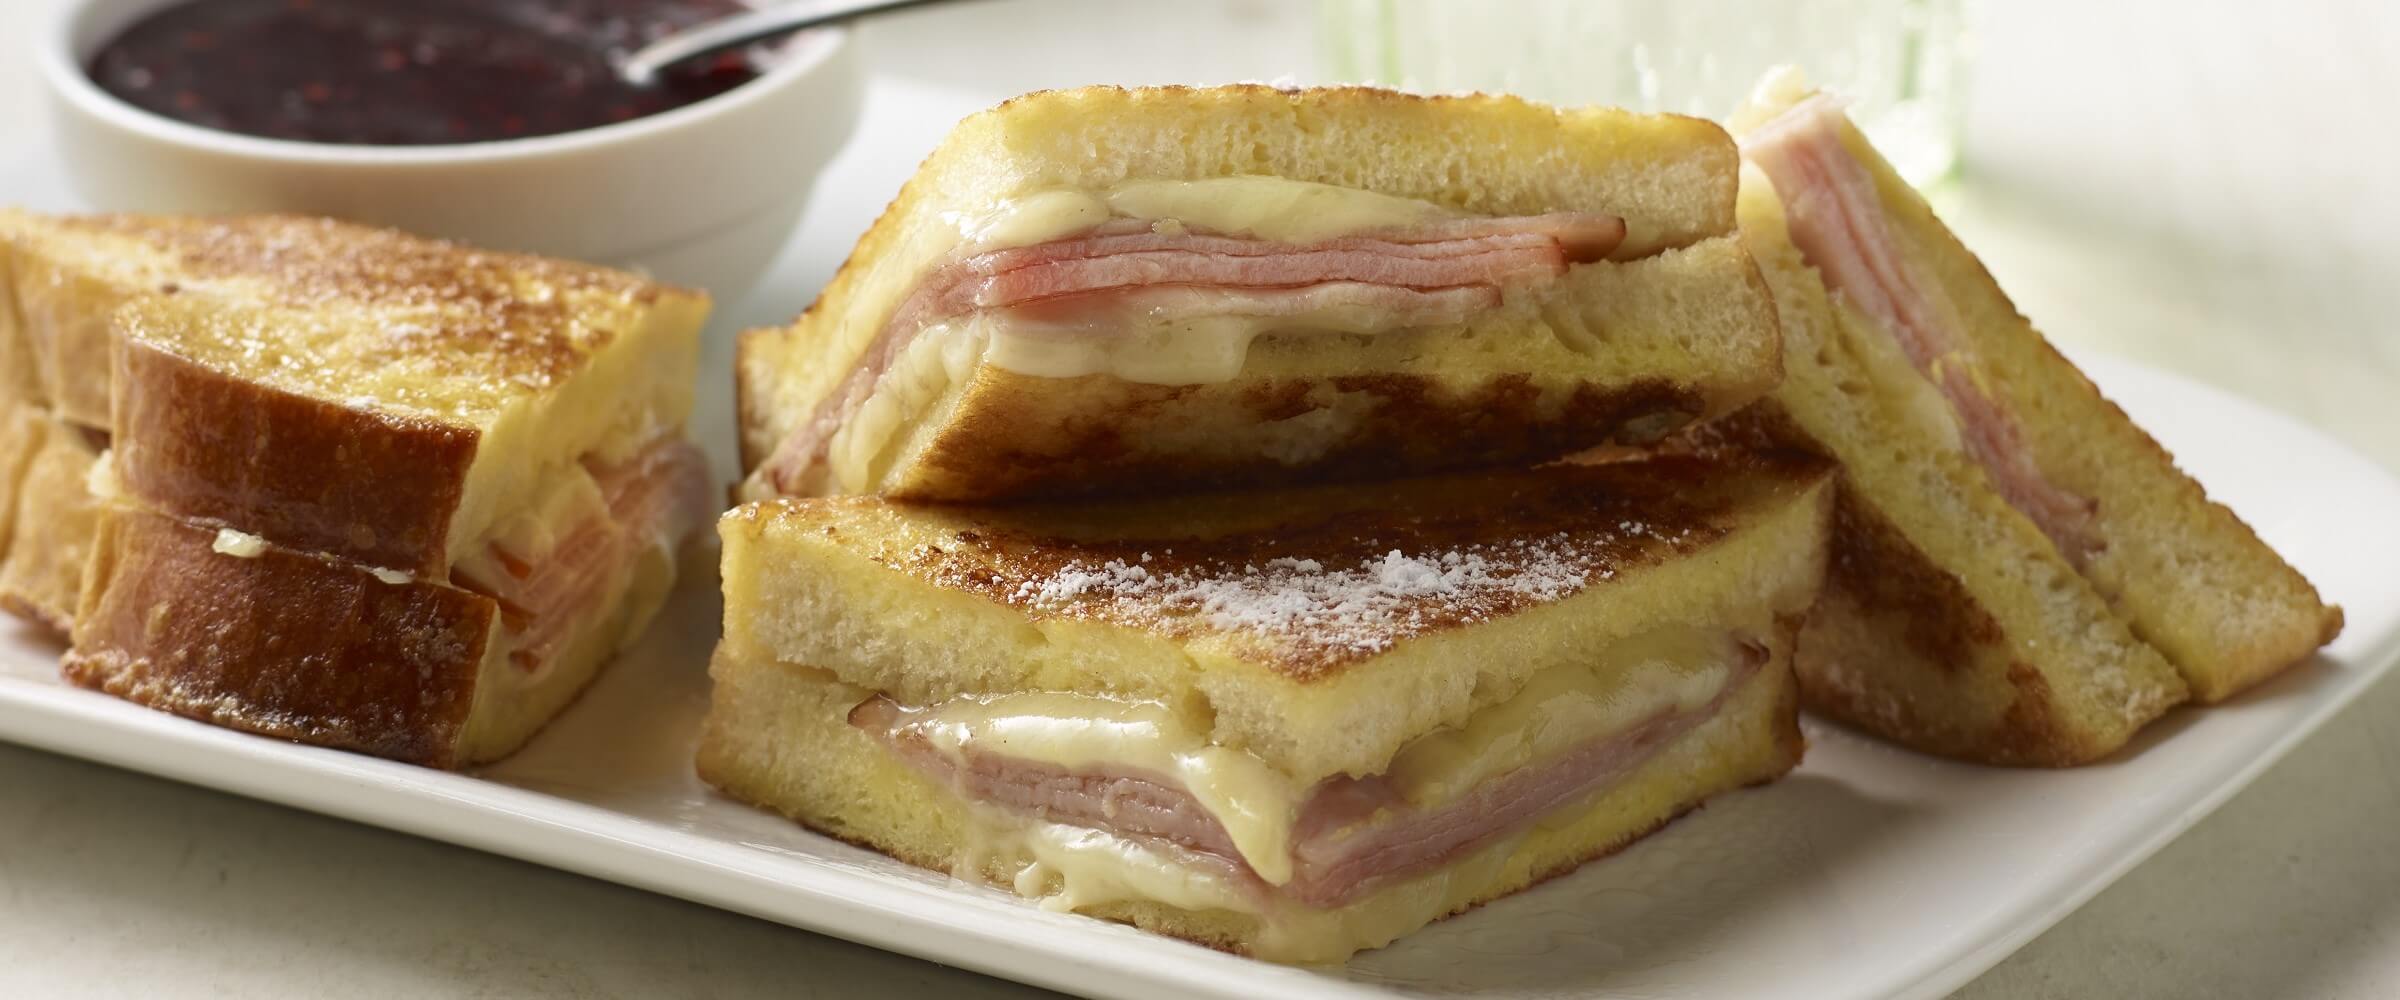 monte cristo sandwich on white plate with dipping sauce